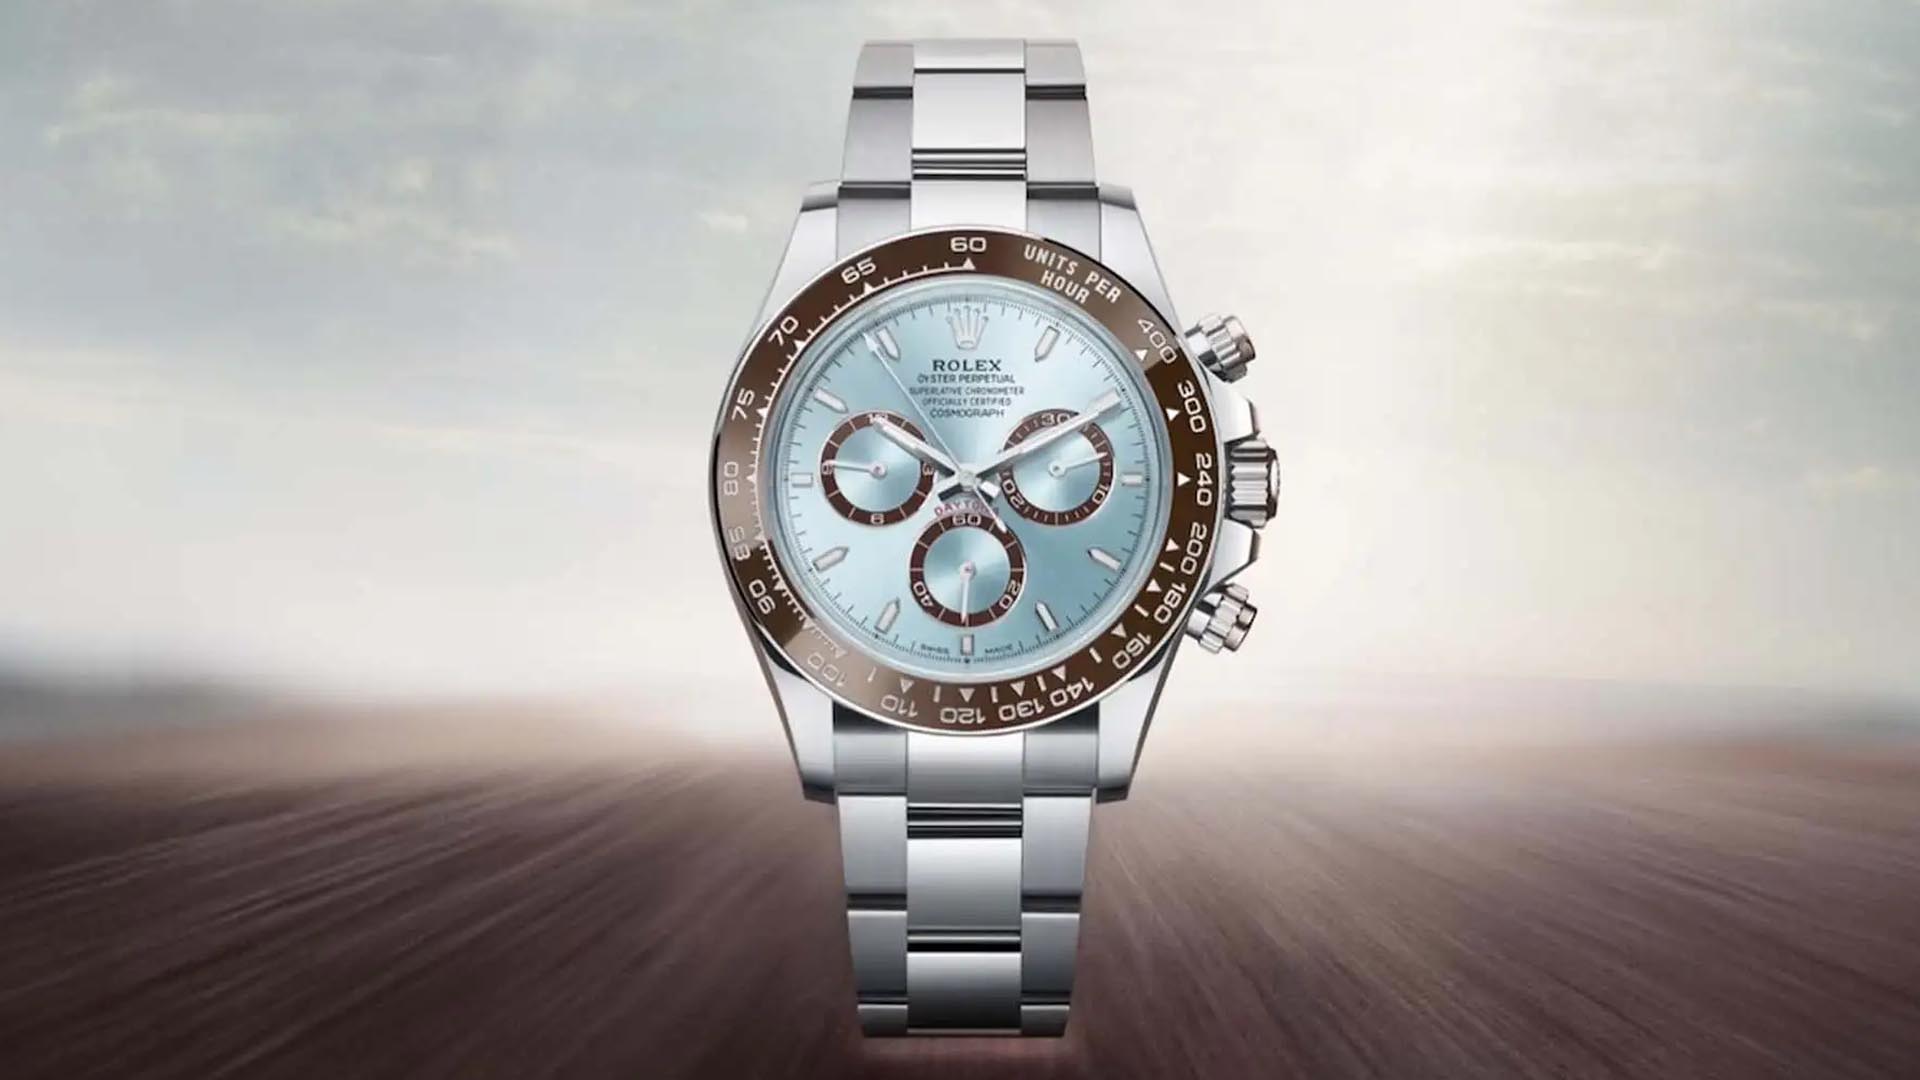 Rolex dominates luxury watch market with new Oyster Perpetual Cosmograph Daytona